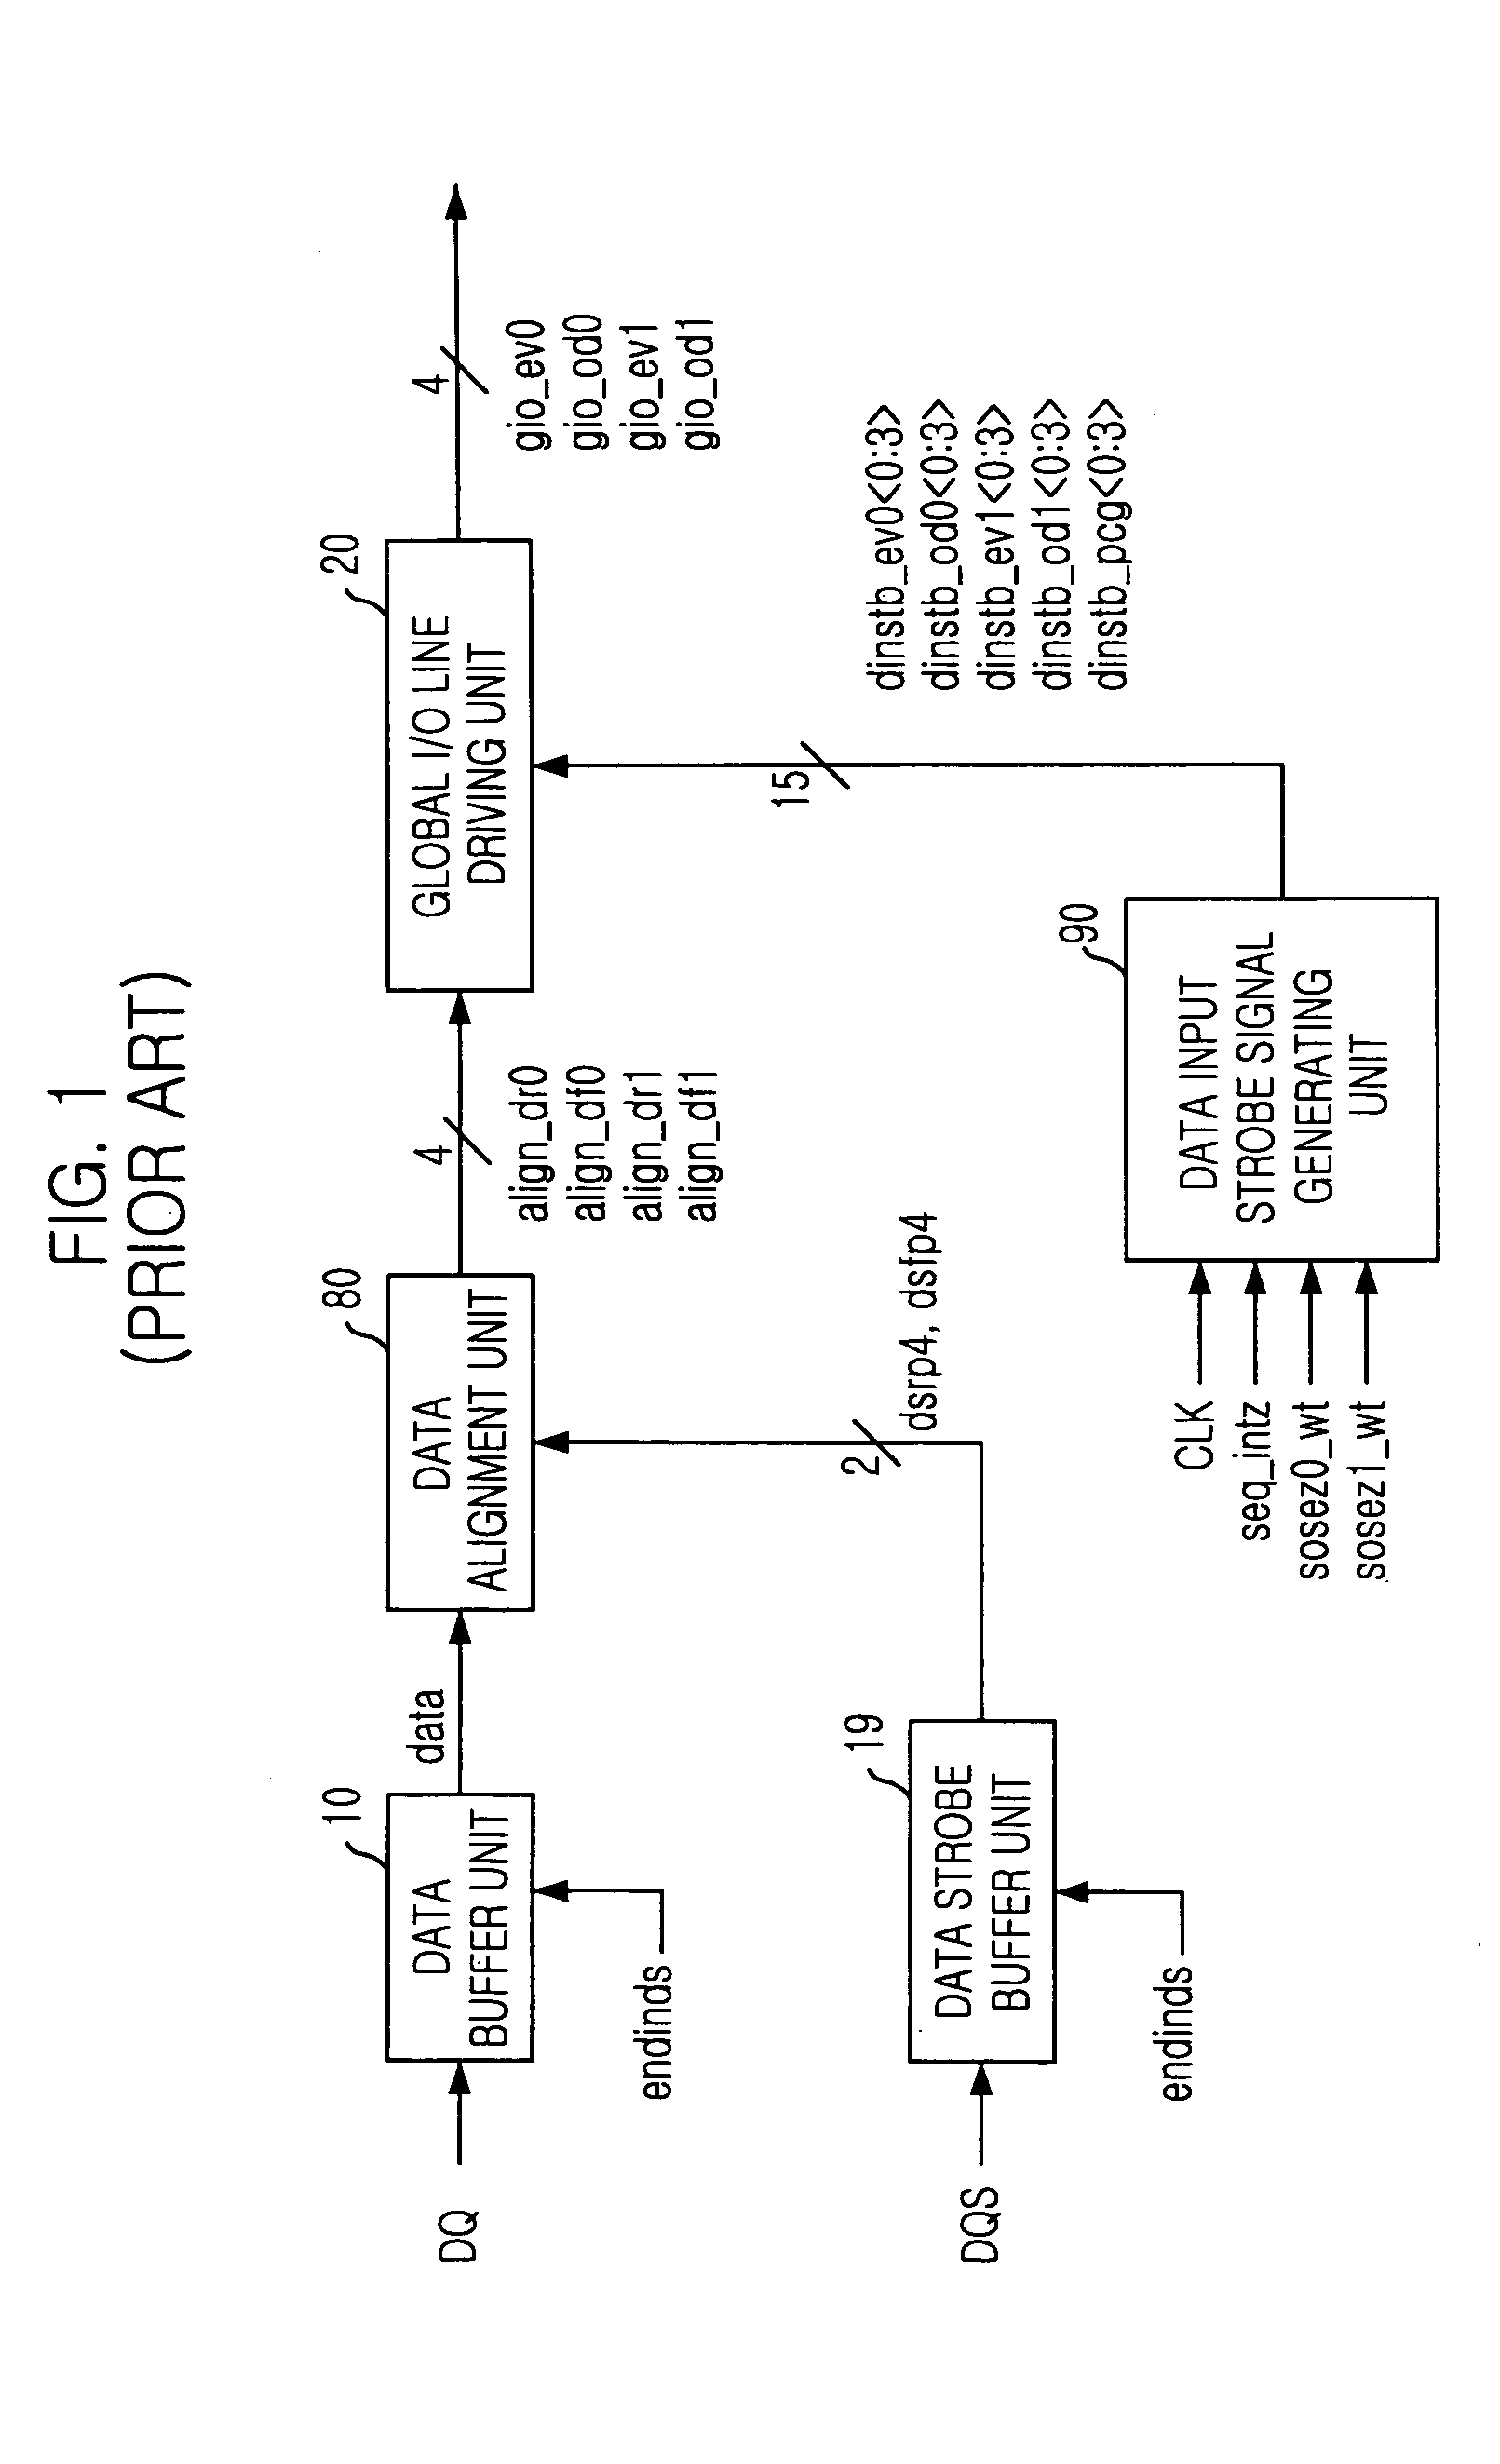 Synchronous semiconductor memory device with input-data controller advantageous to low power and high frequency